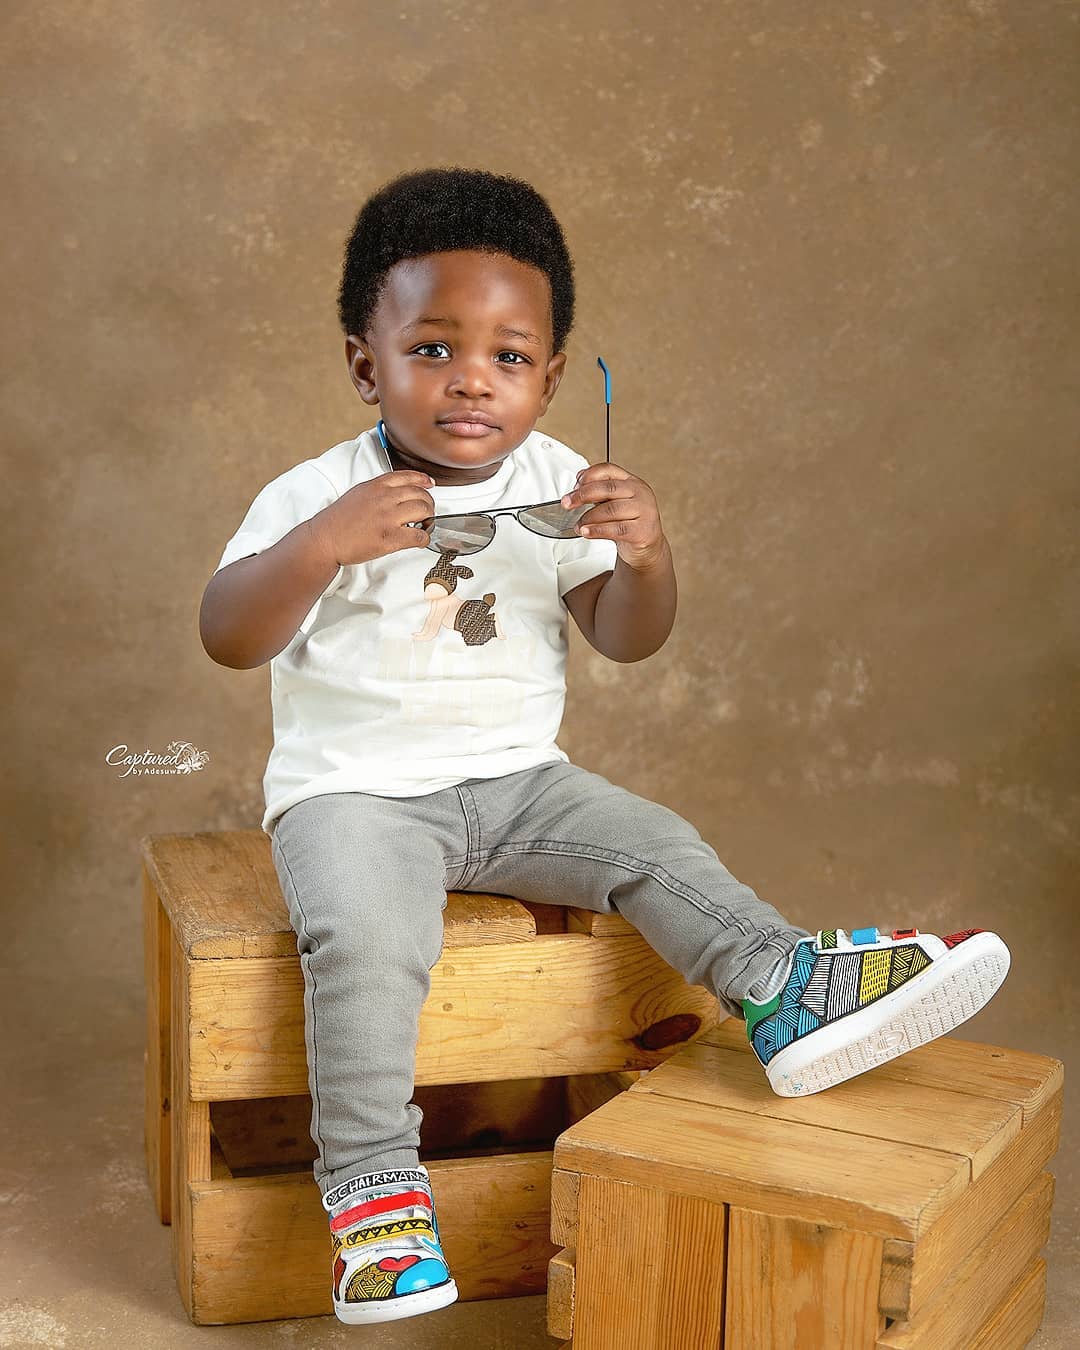 Toolz shares first picture of herself and Tunde Demuren's son and we're gushing!